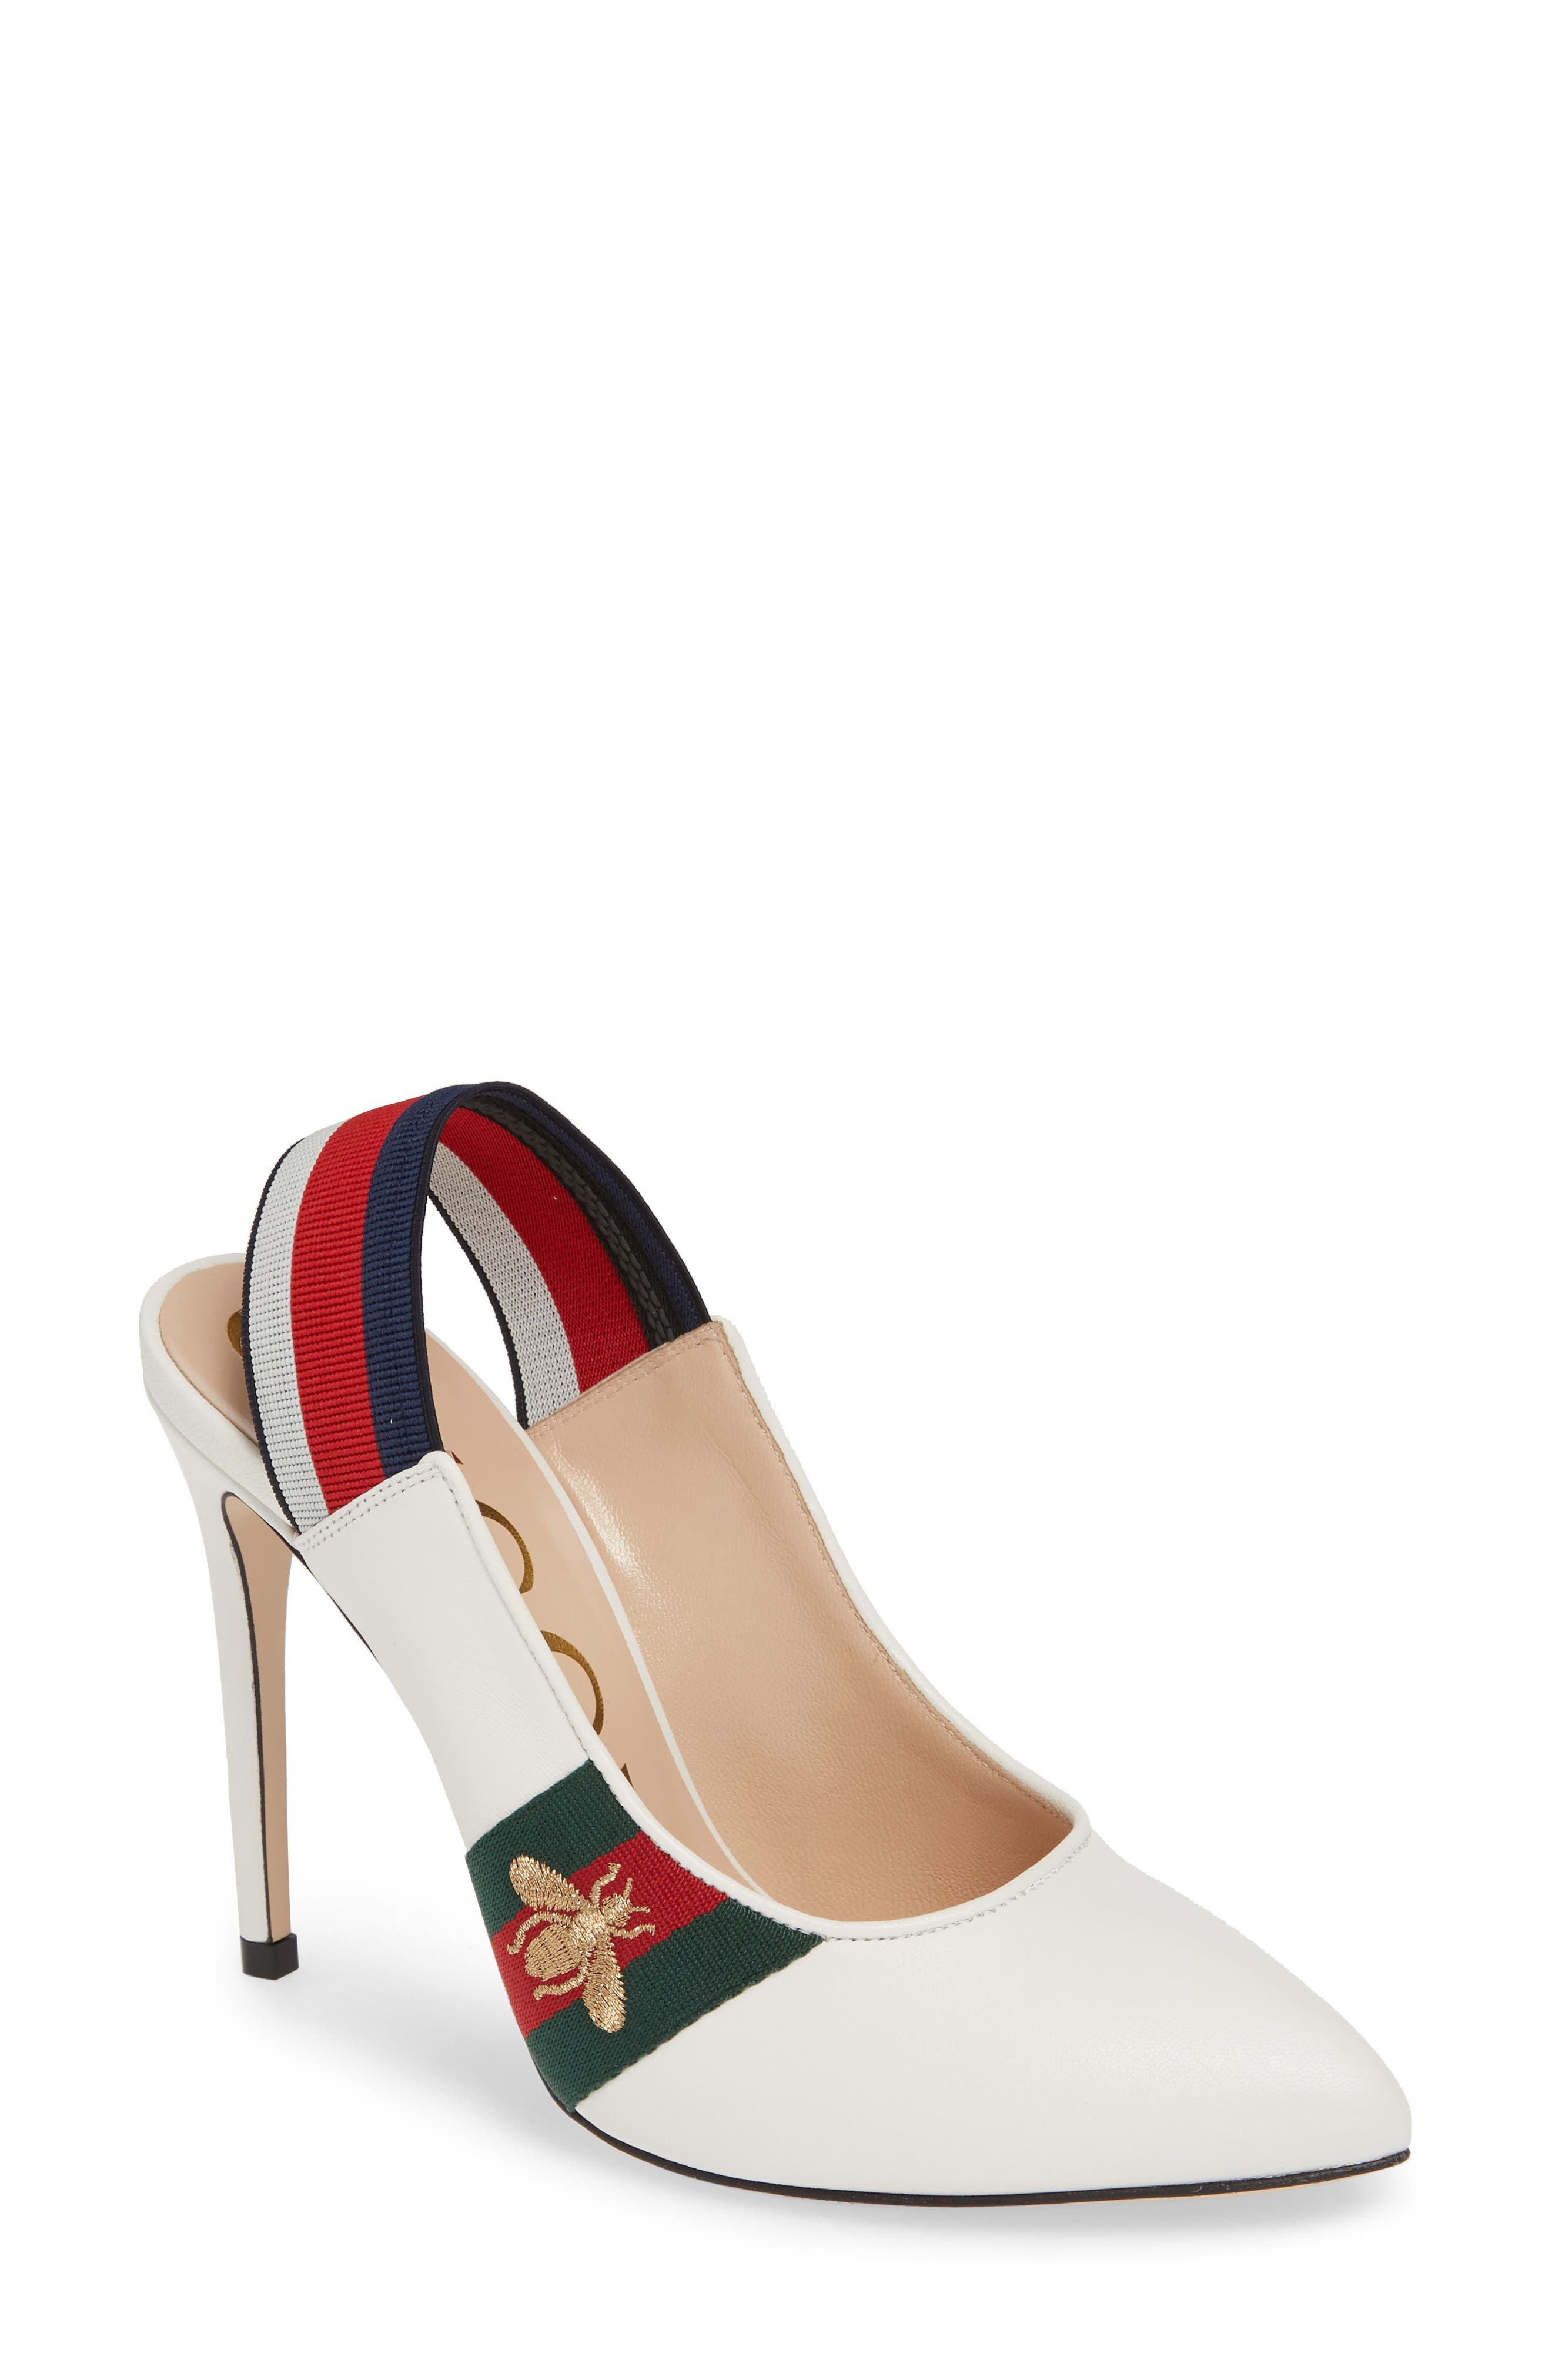 gucci pumps with bee